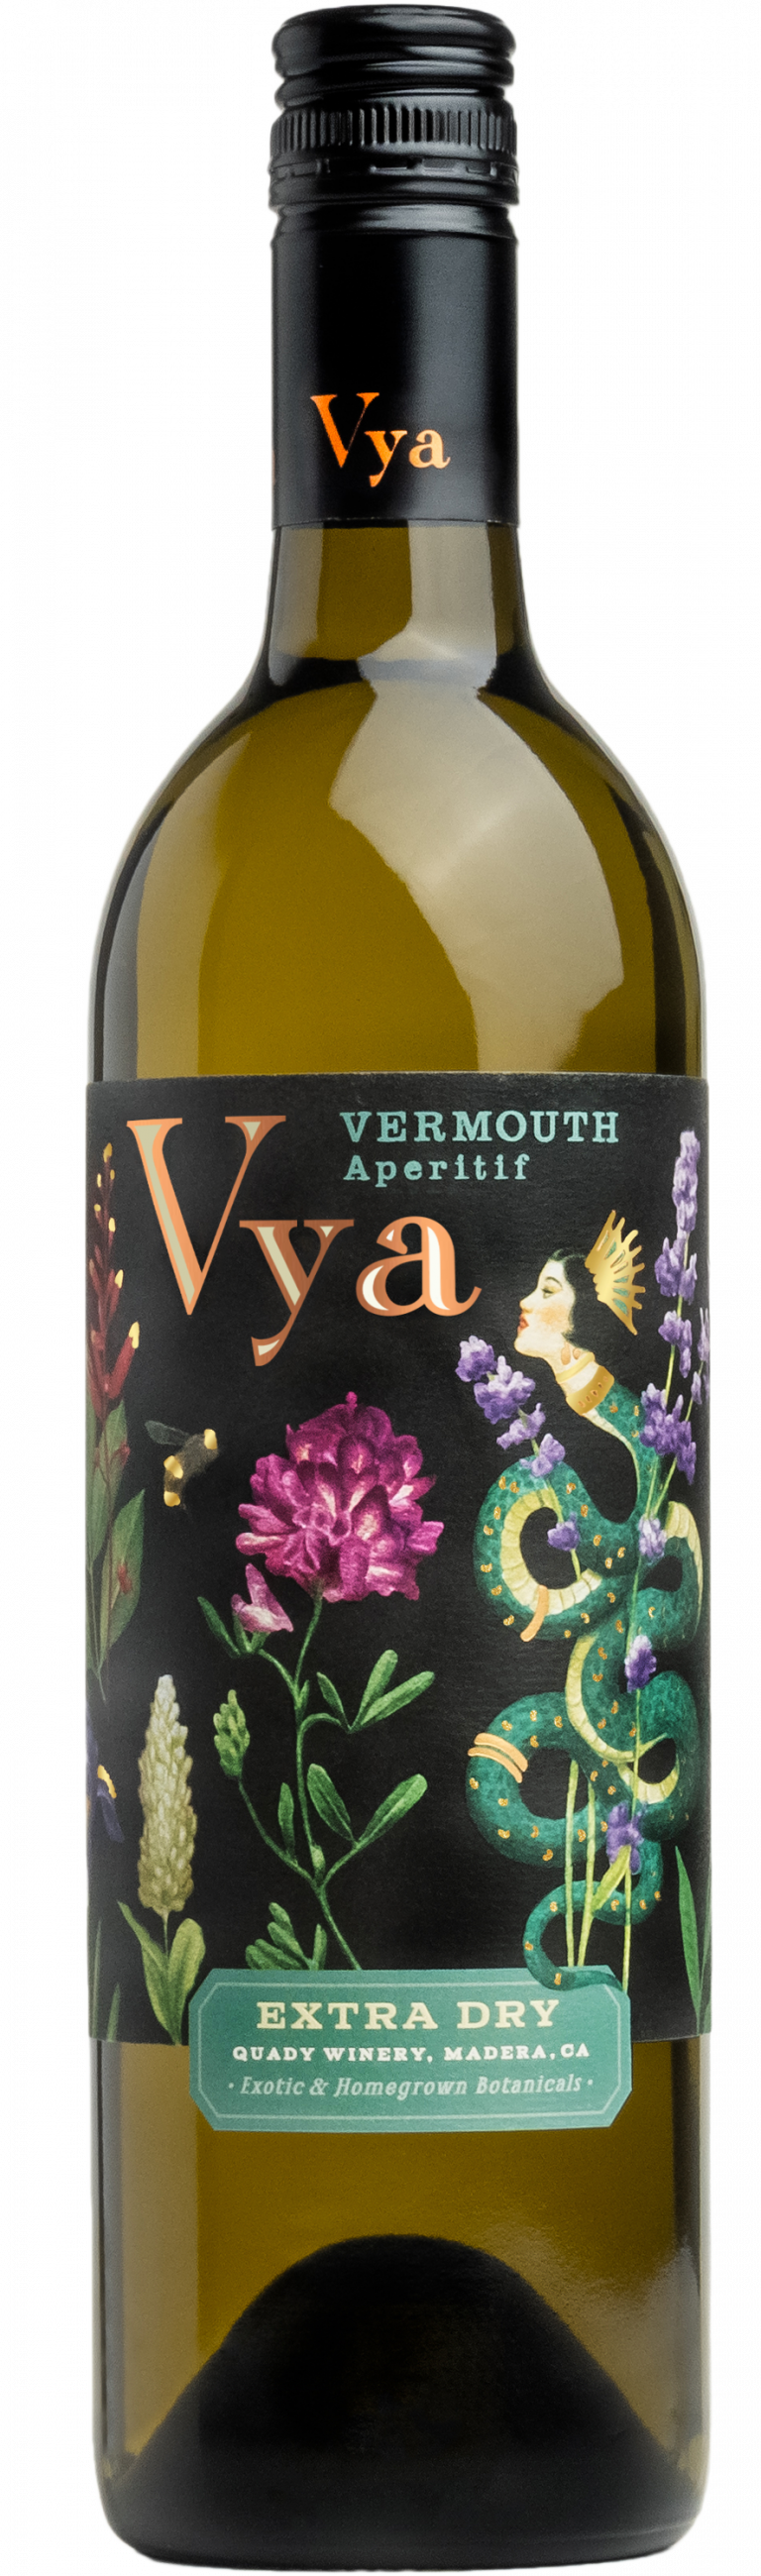 Vya Extra Dry Vermouth bottle